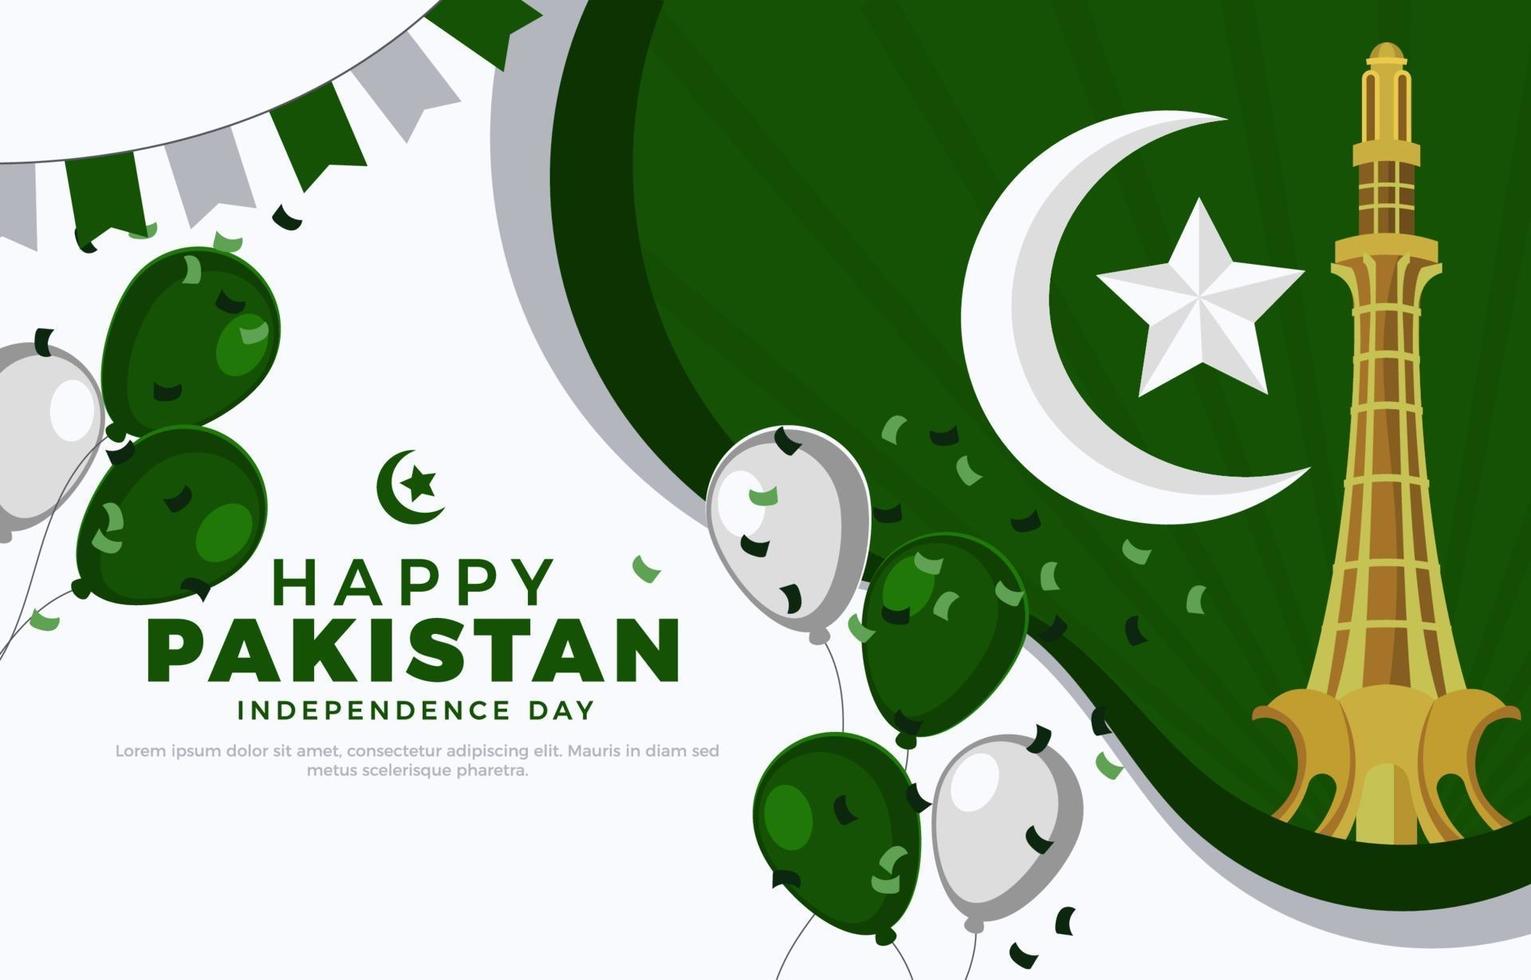 Pakistan Independence Day Background Template vector